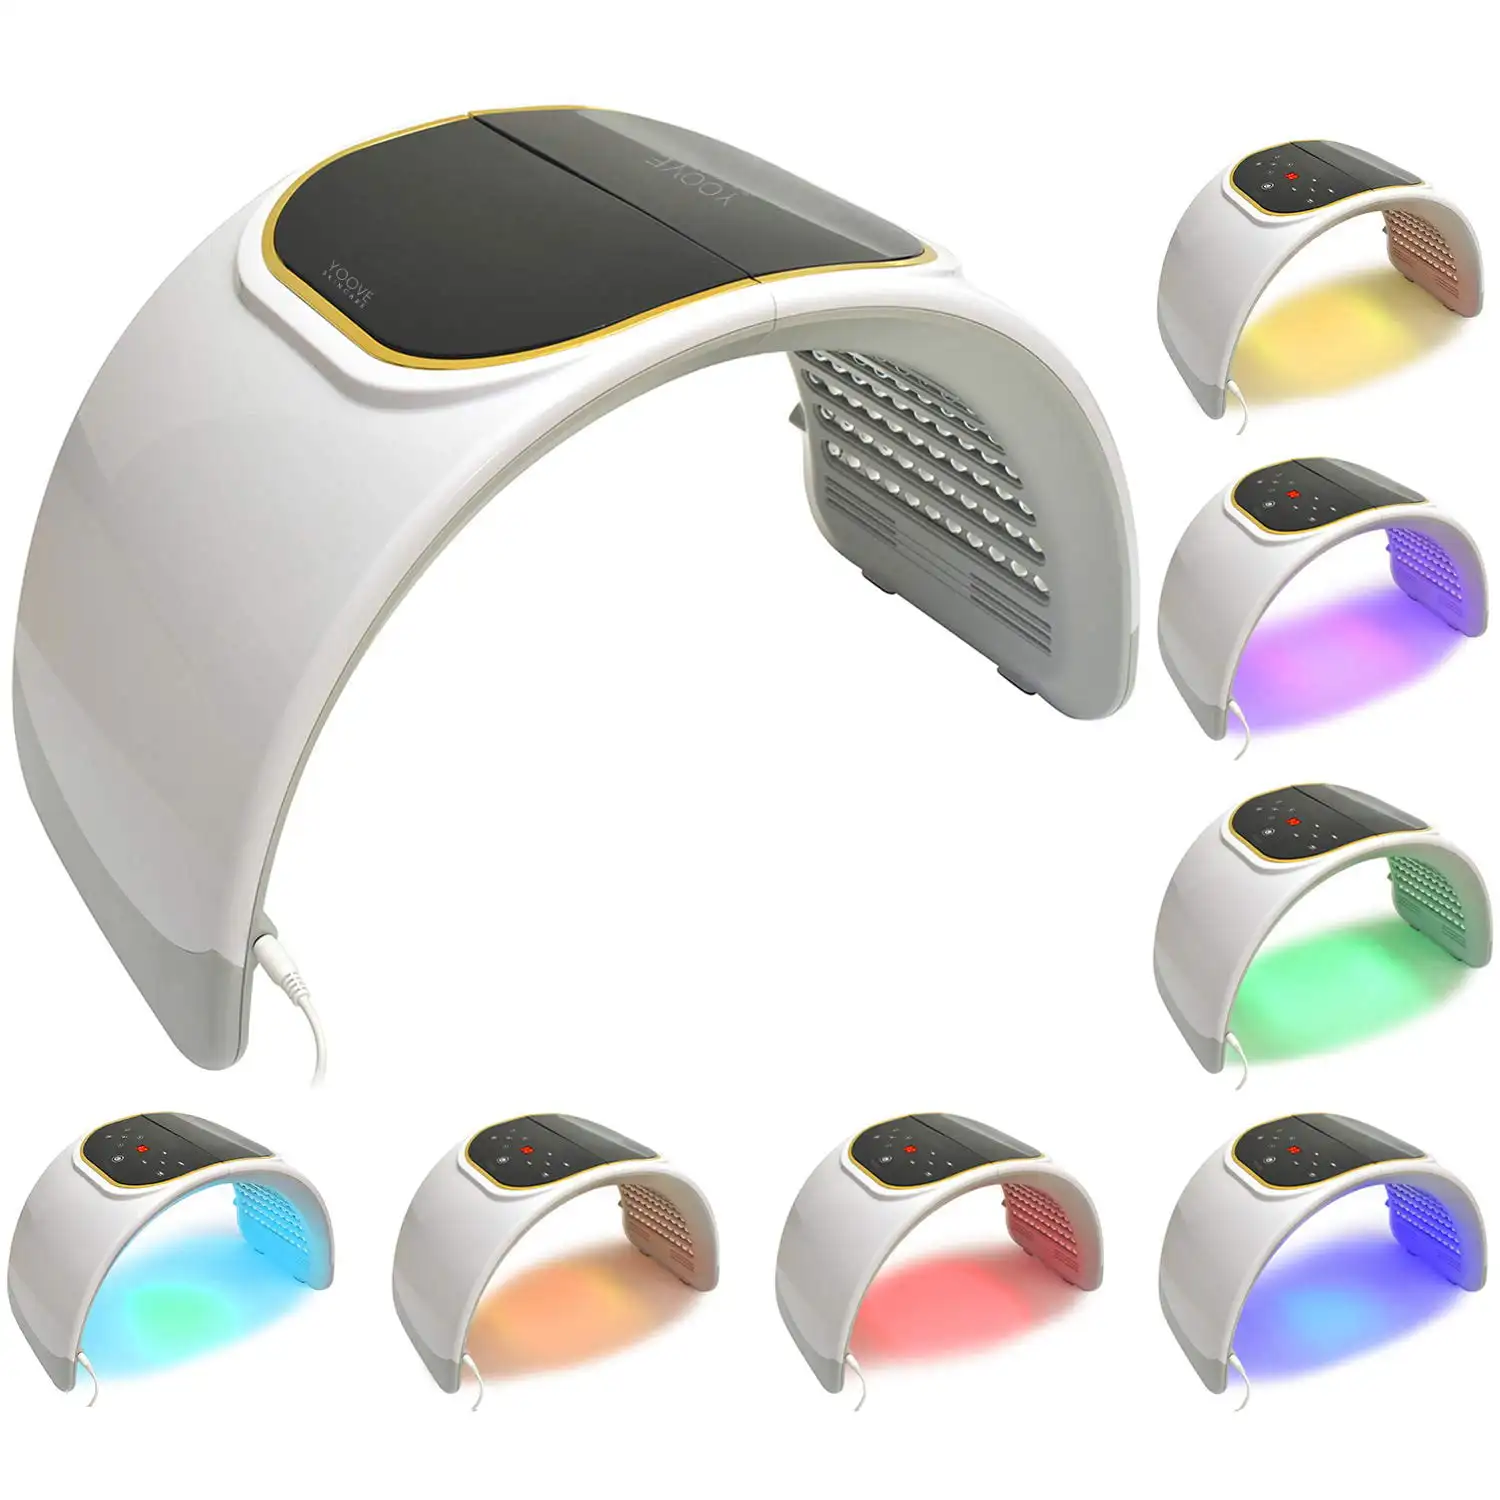 NEW LED Facial Light Therapy - 7 Colors Including Red Light Therapy For Healthy Face and Skin Rejuvenation | Home Light Therapy